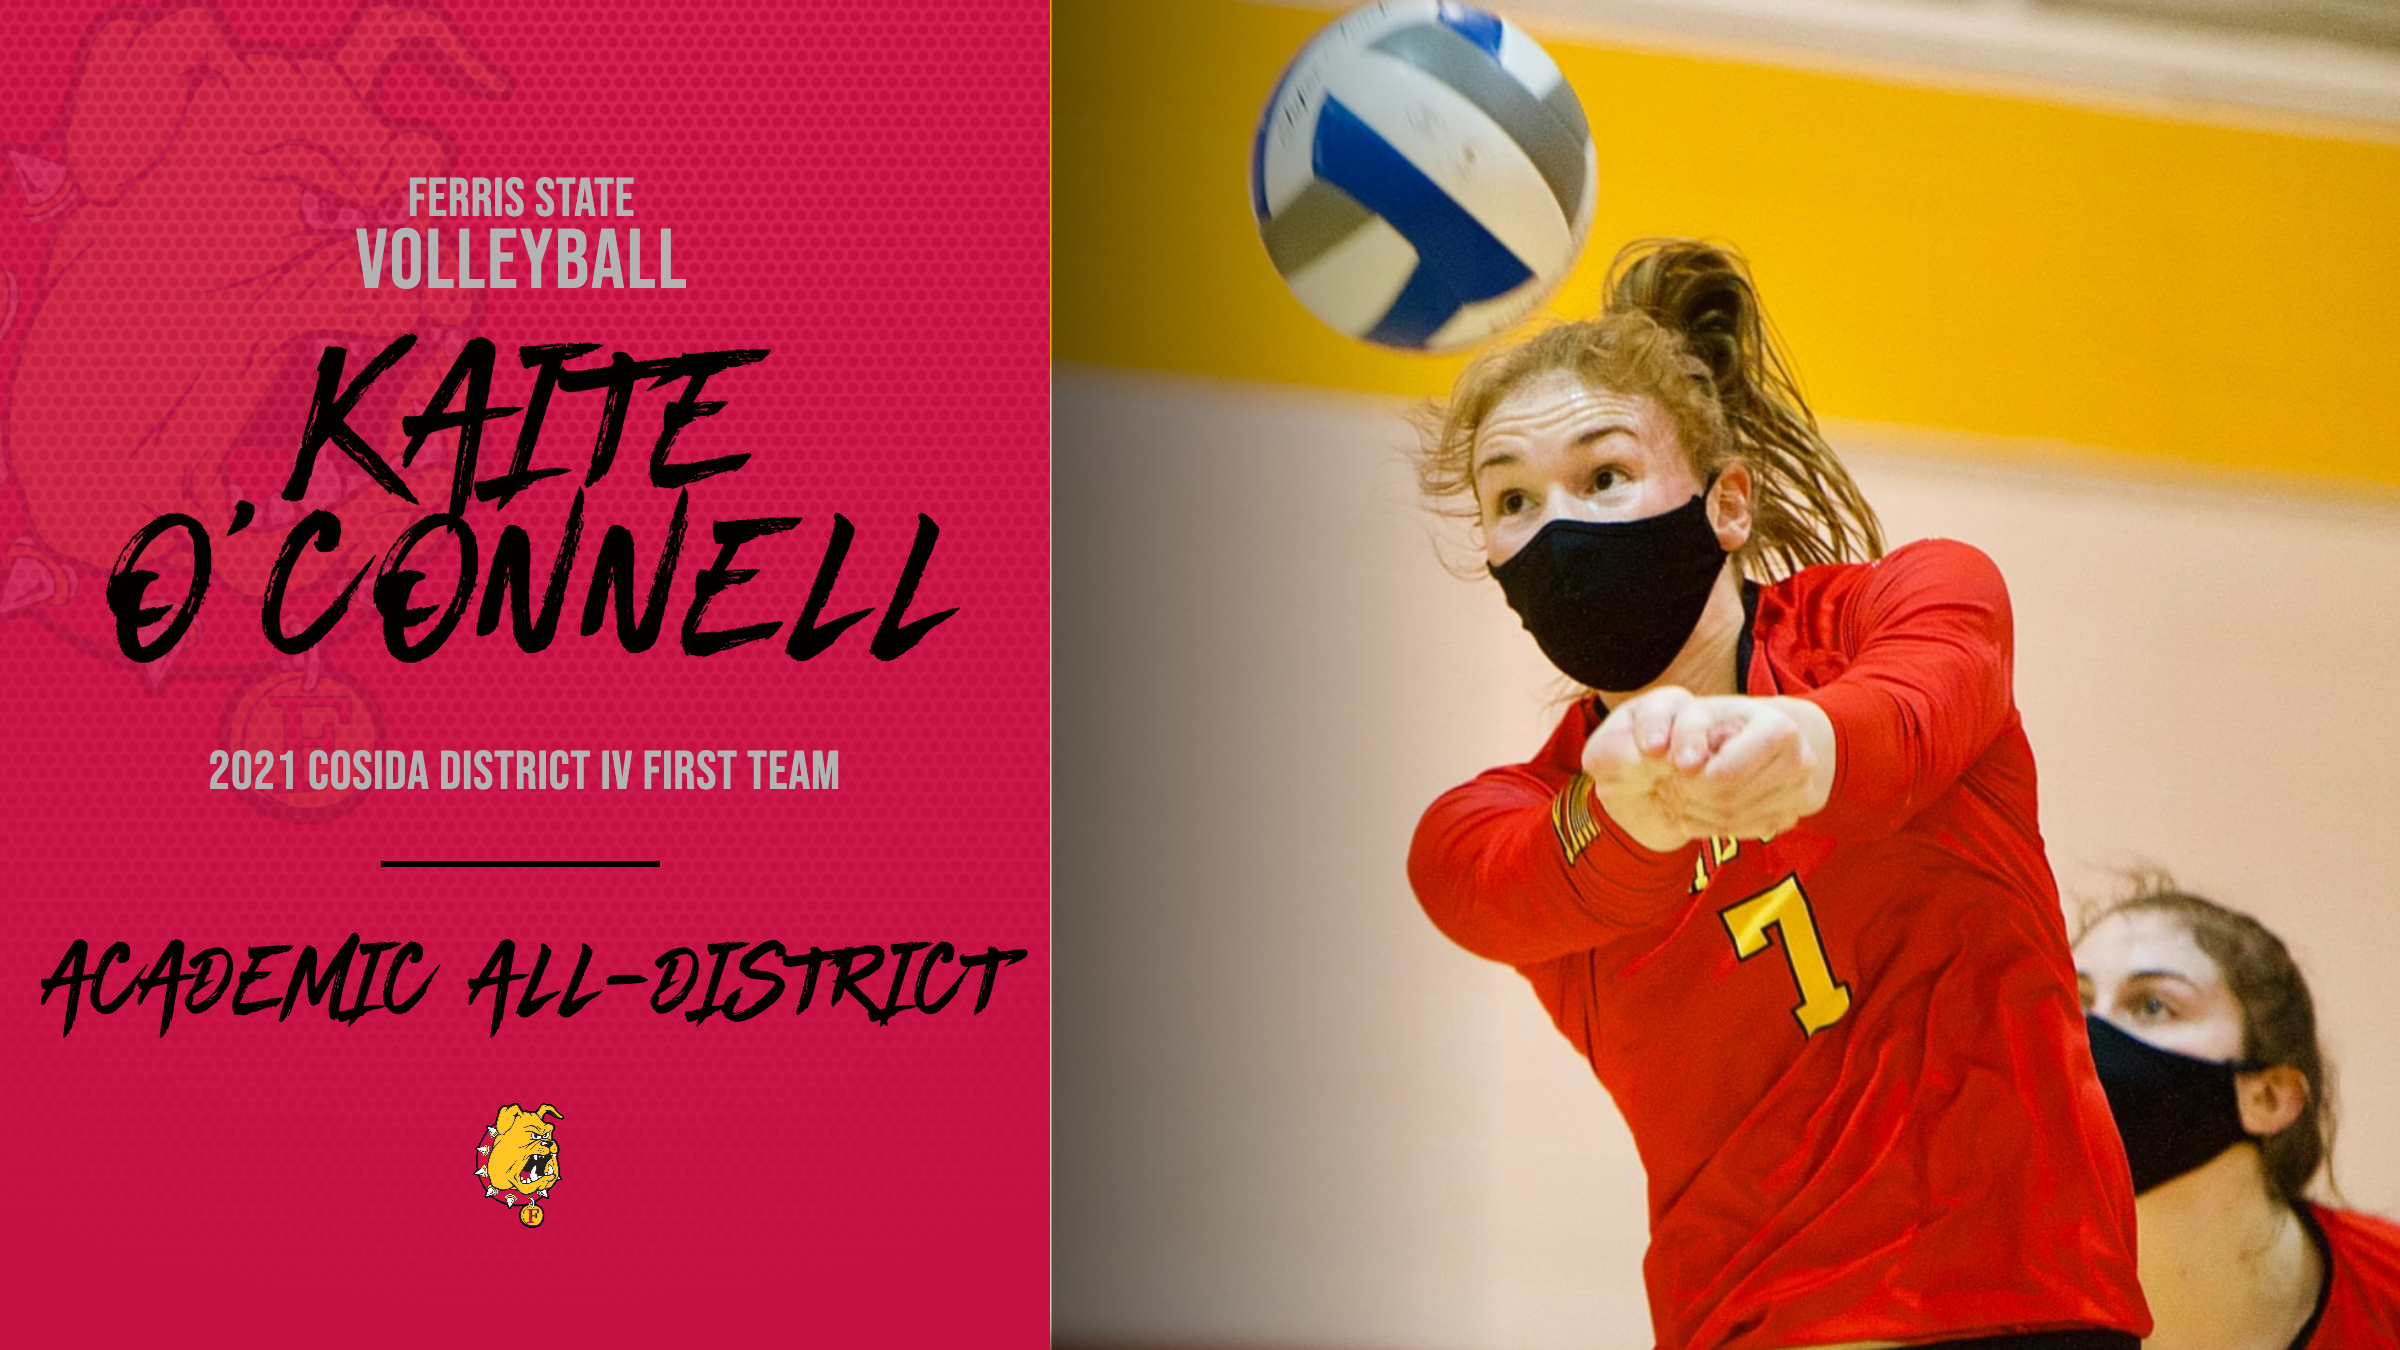 Ferris State's Katie O'Connell Garners 2021 CoSIDA Academic All-District IV First Team Laurels